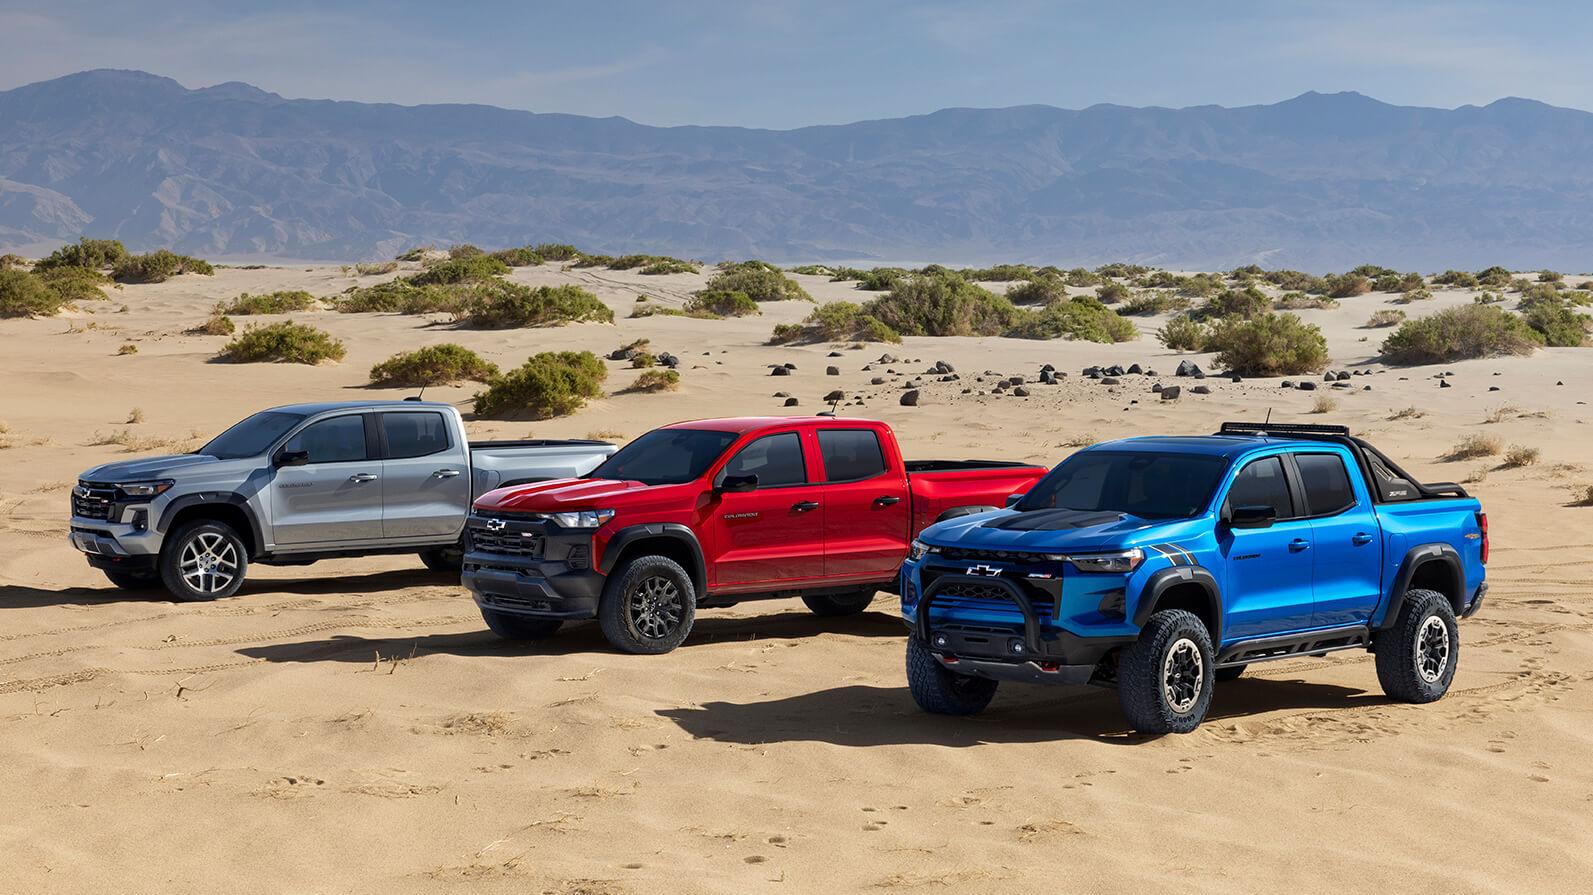 Buying a Truck Understanding the Difference Between Crew Cab, Quad Cab, King Cab, and Other Models